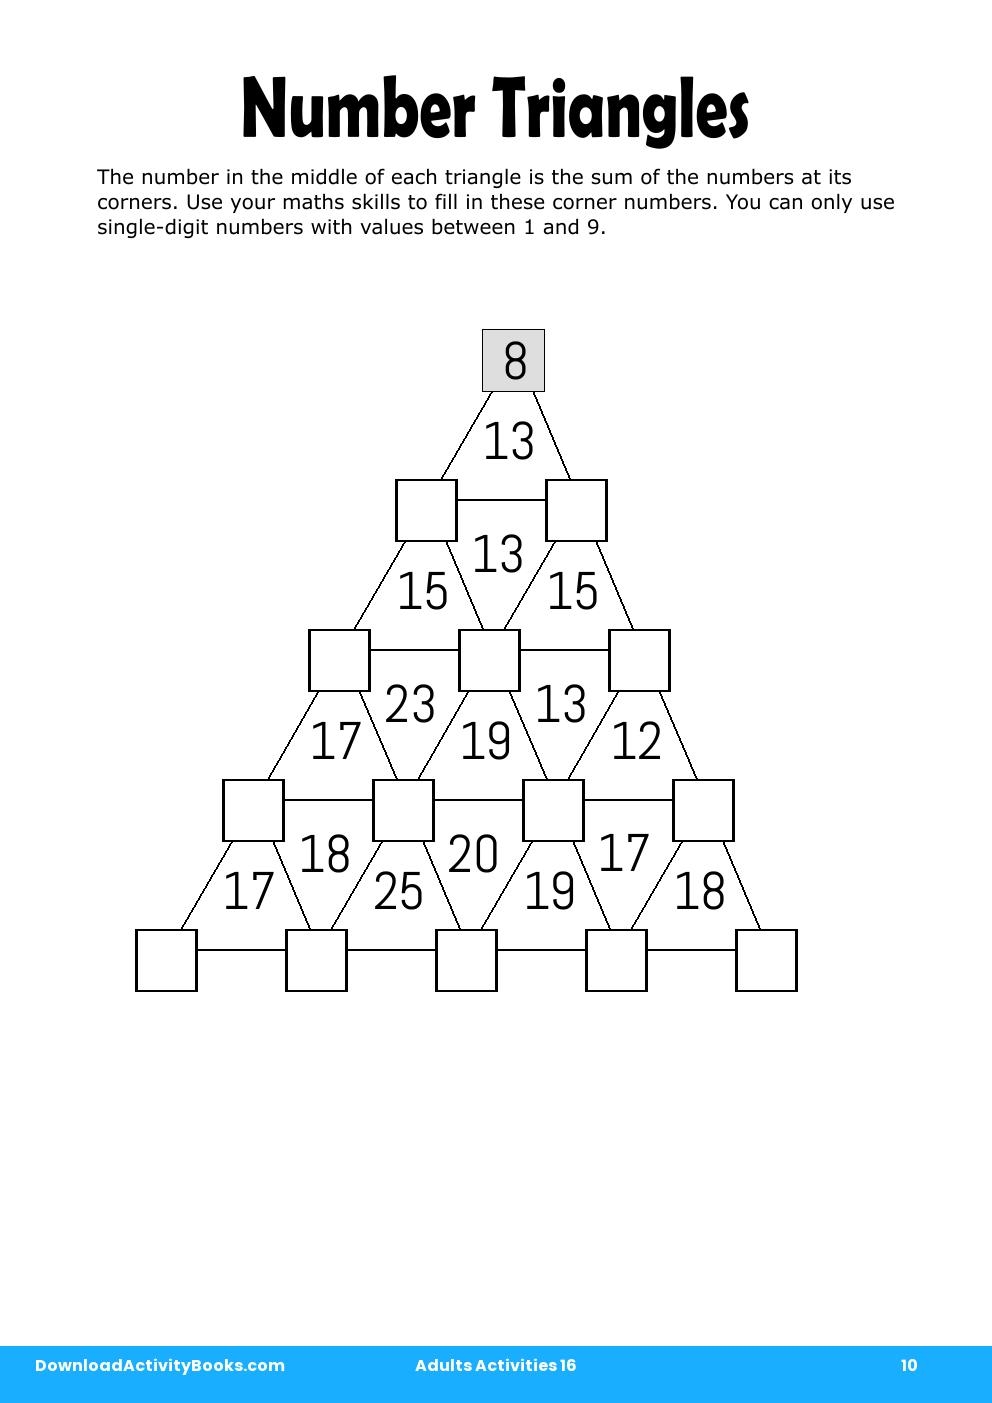 Number Triangles in Adults Activities 16